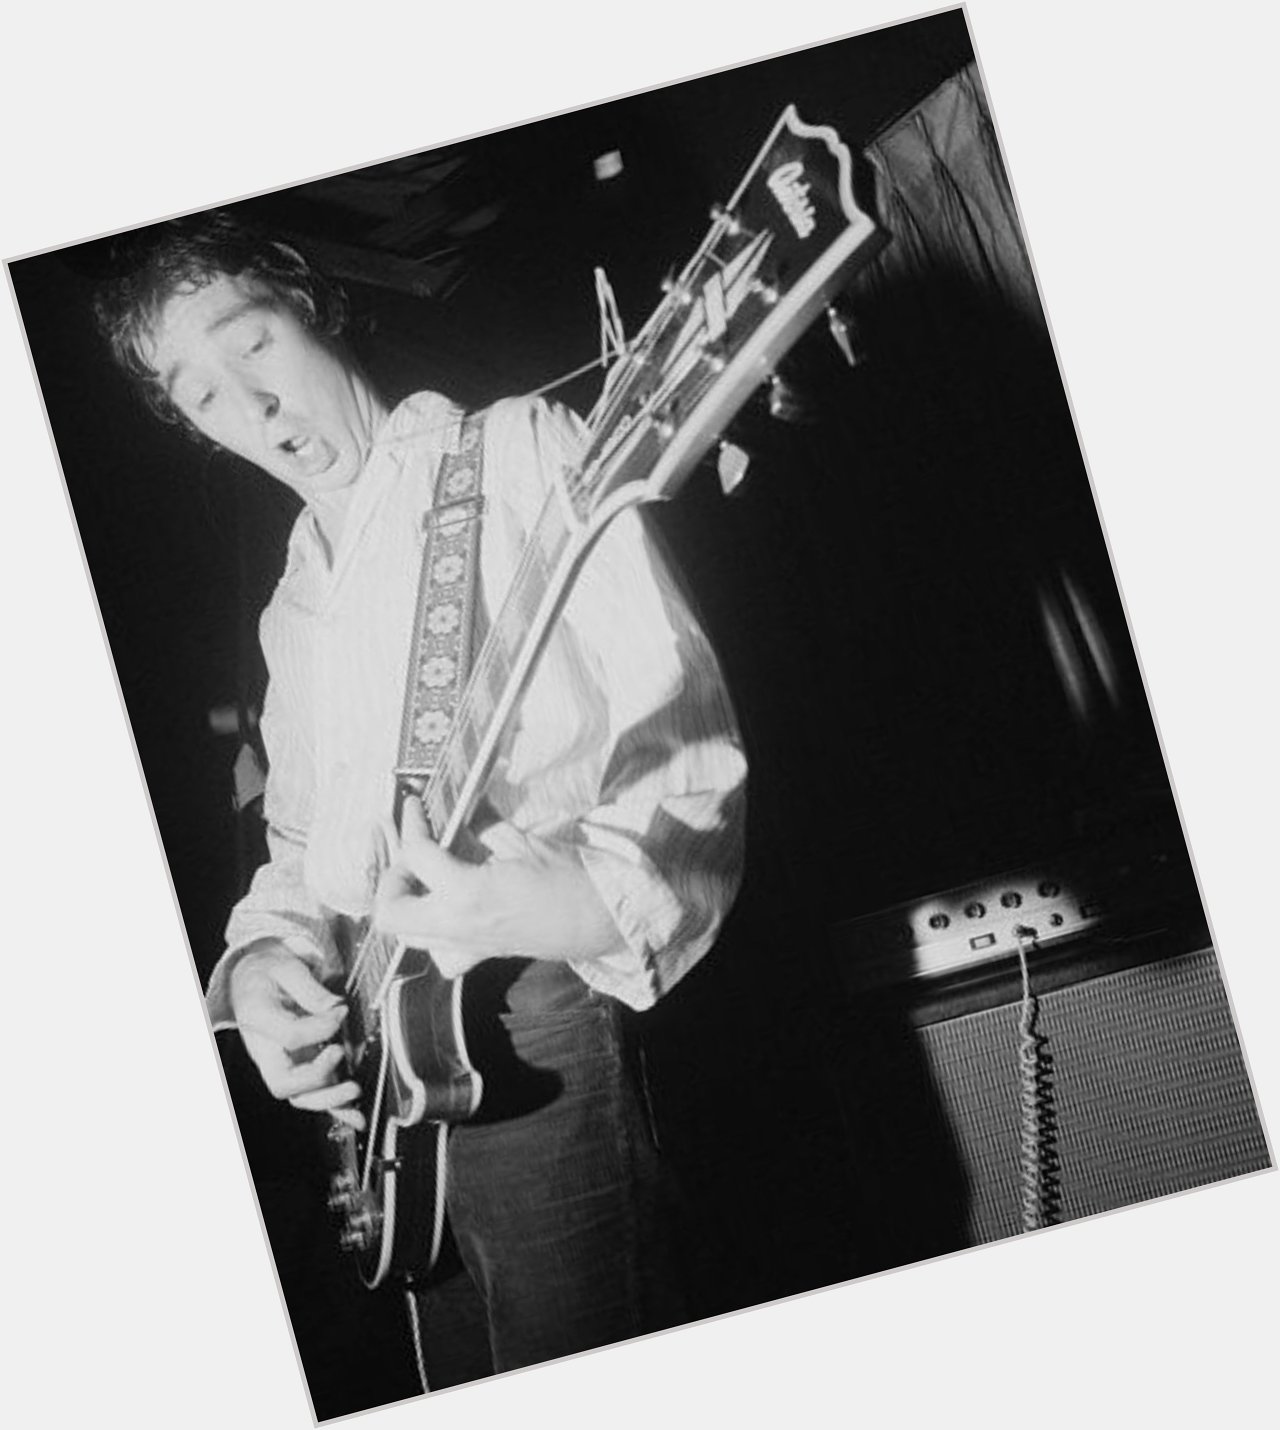 Happy Birthday to The Buzzcocks guitarist and songwriter Steve Diggle, born on this day in Manchester in 1955.    